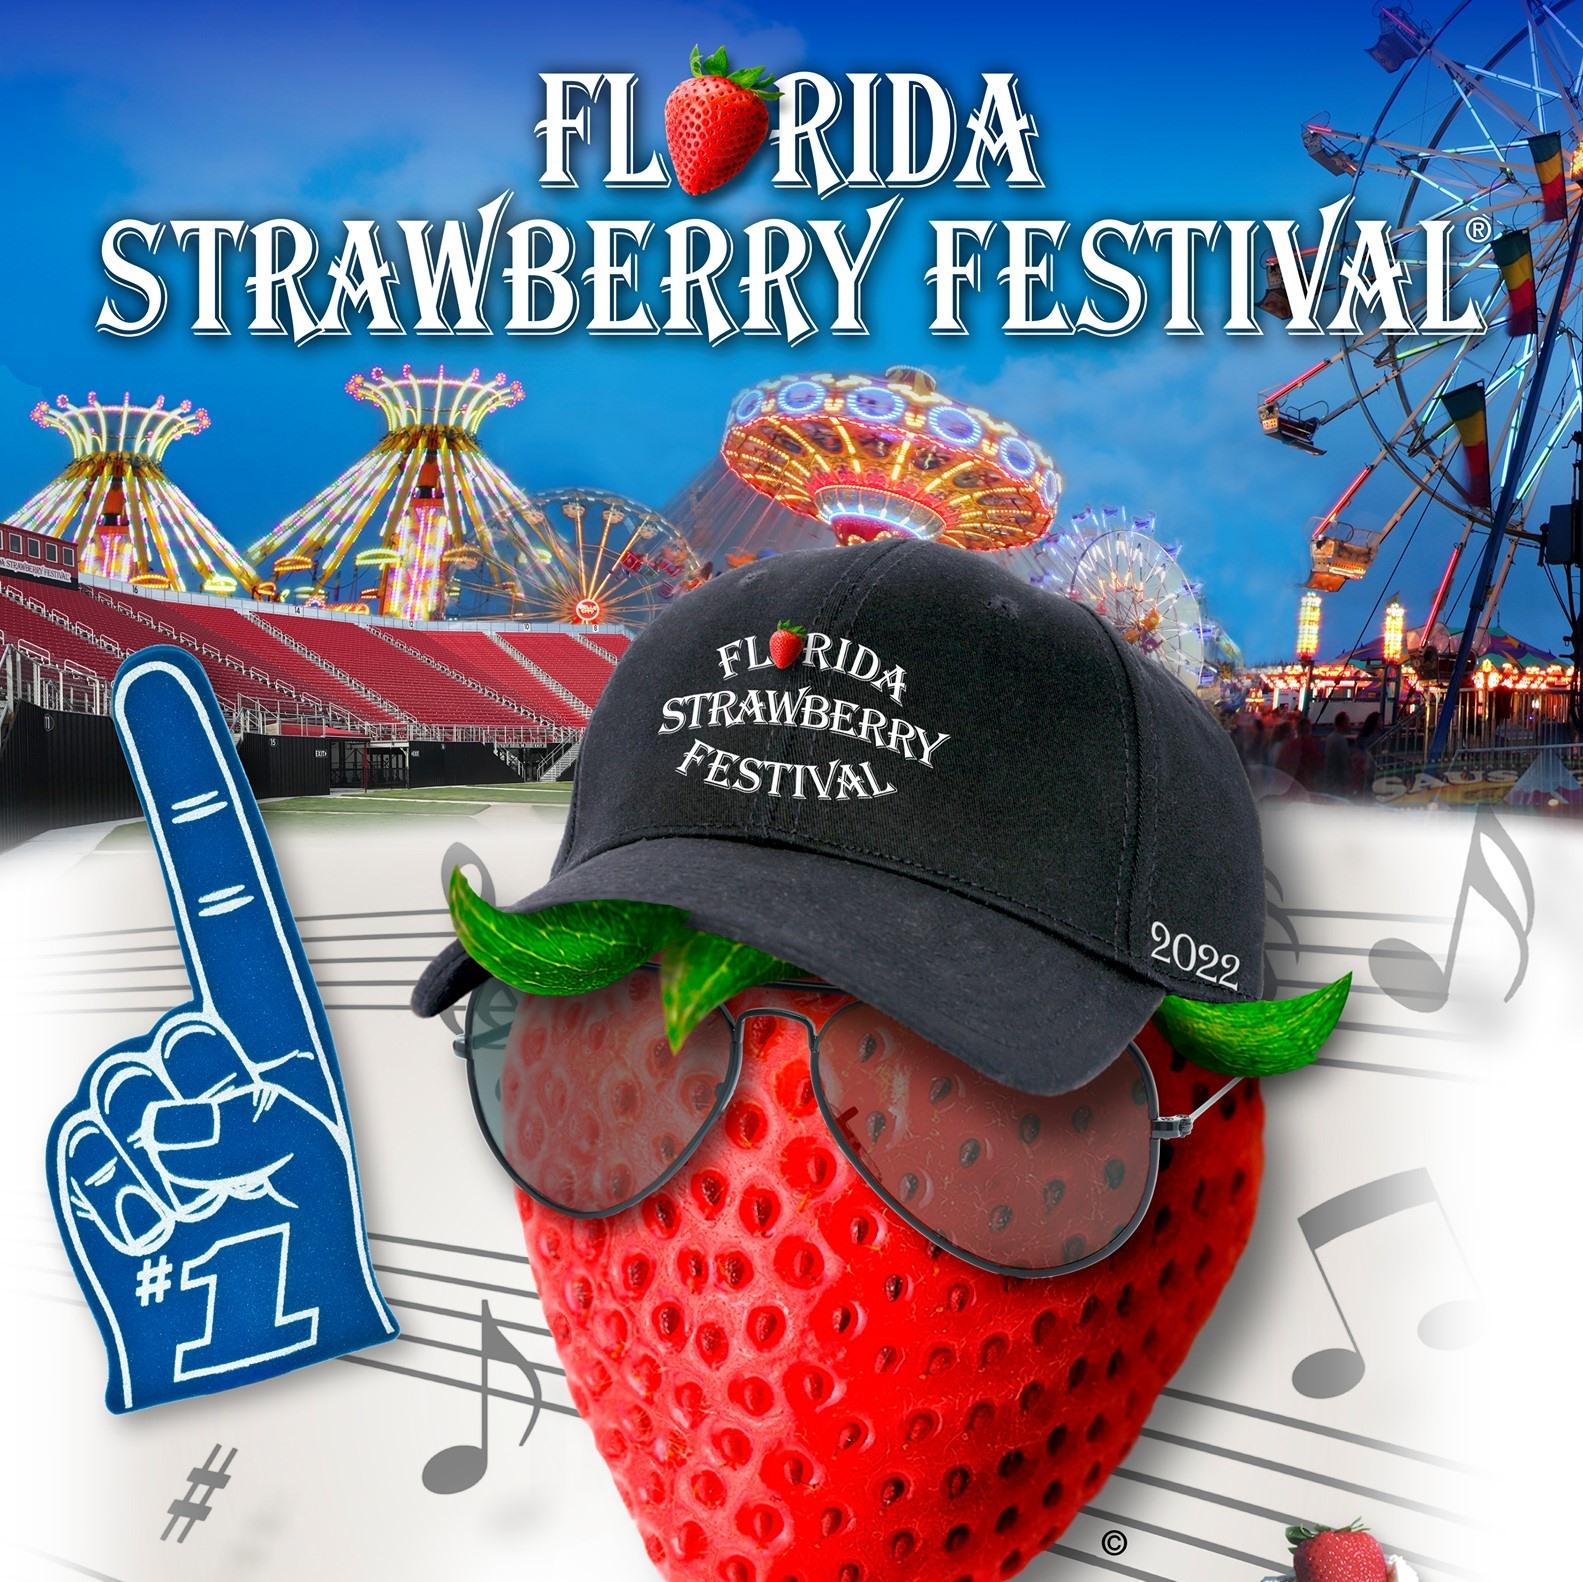 Florida Strawberry Festival Festival Lineup, Dates and Location